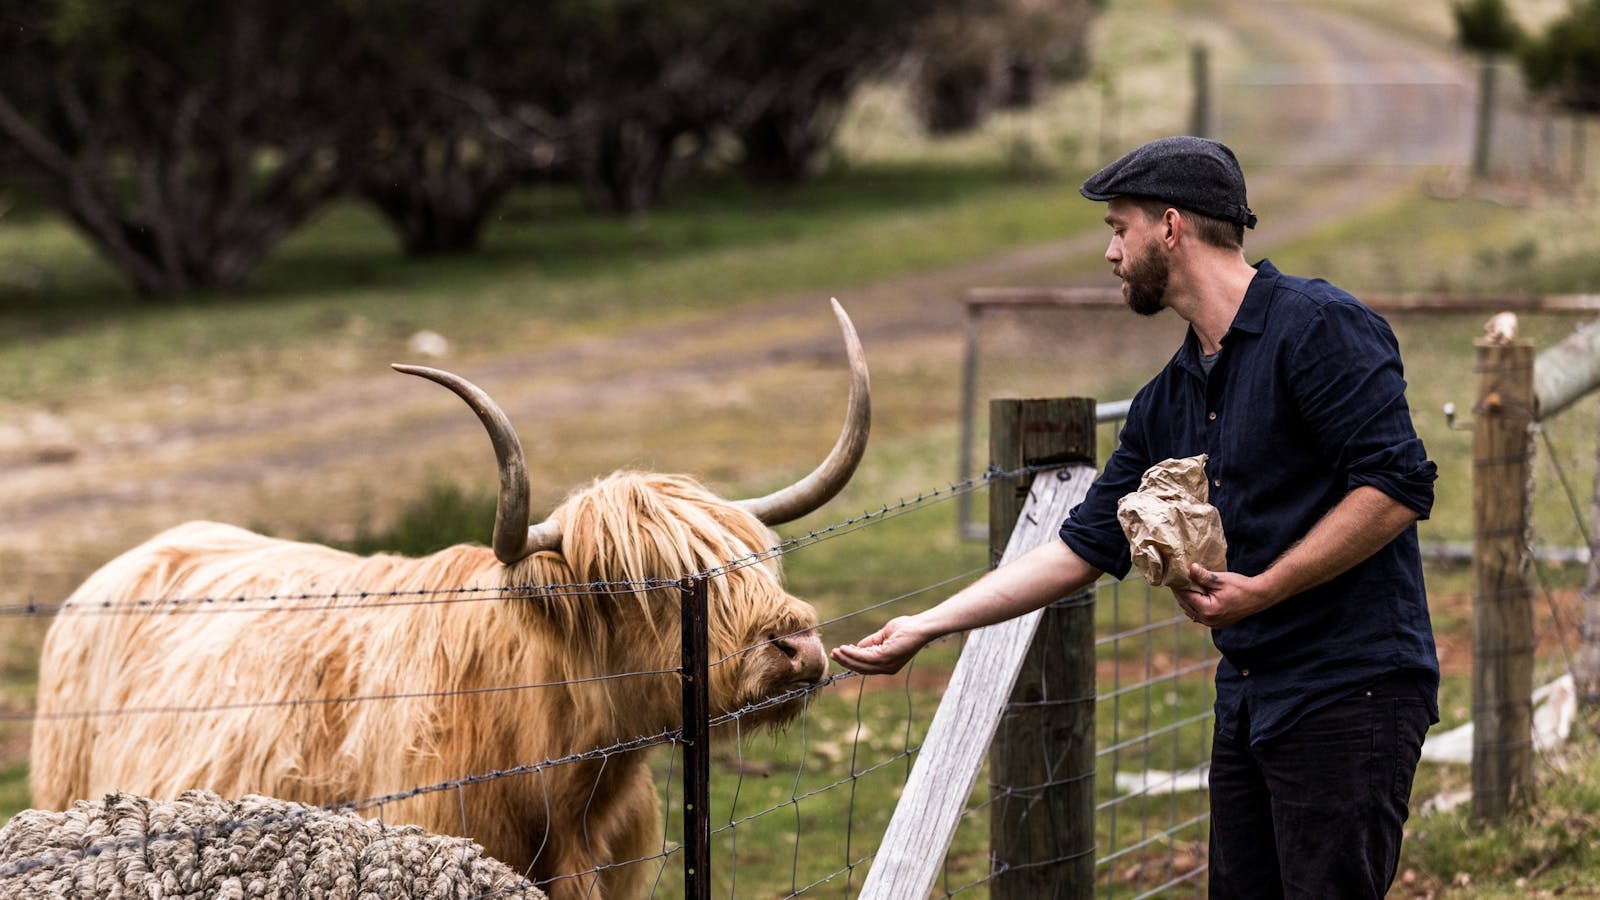 Tarraleah Lodge has its own herd of Scottish Highland Cows that guests are able to hand feed.